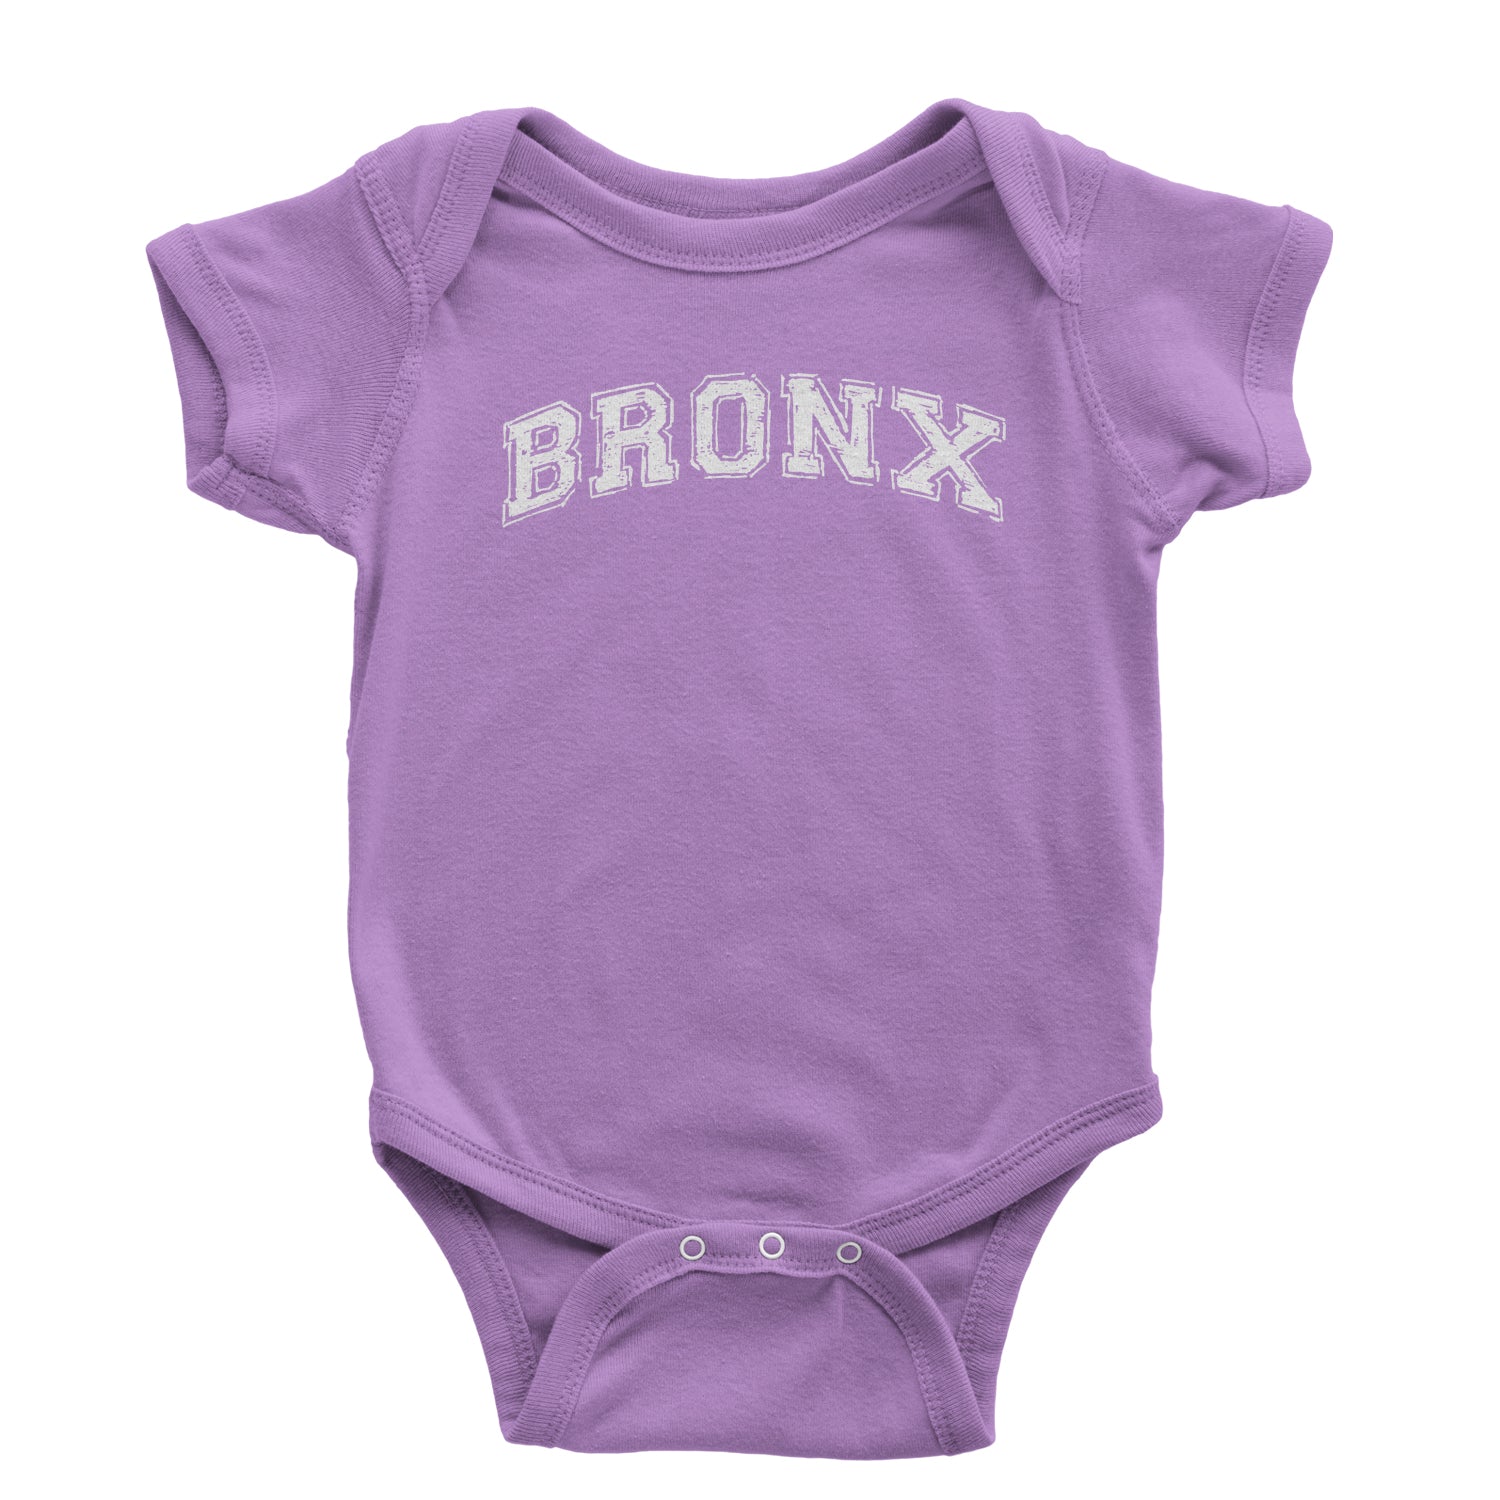 Bronx - From The Block Infant One-Piece Romper Bodysuit b, cardi, concert, its, Jennifer, lopez, merch, my, party, tour by Expression Tees